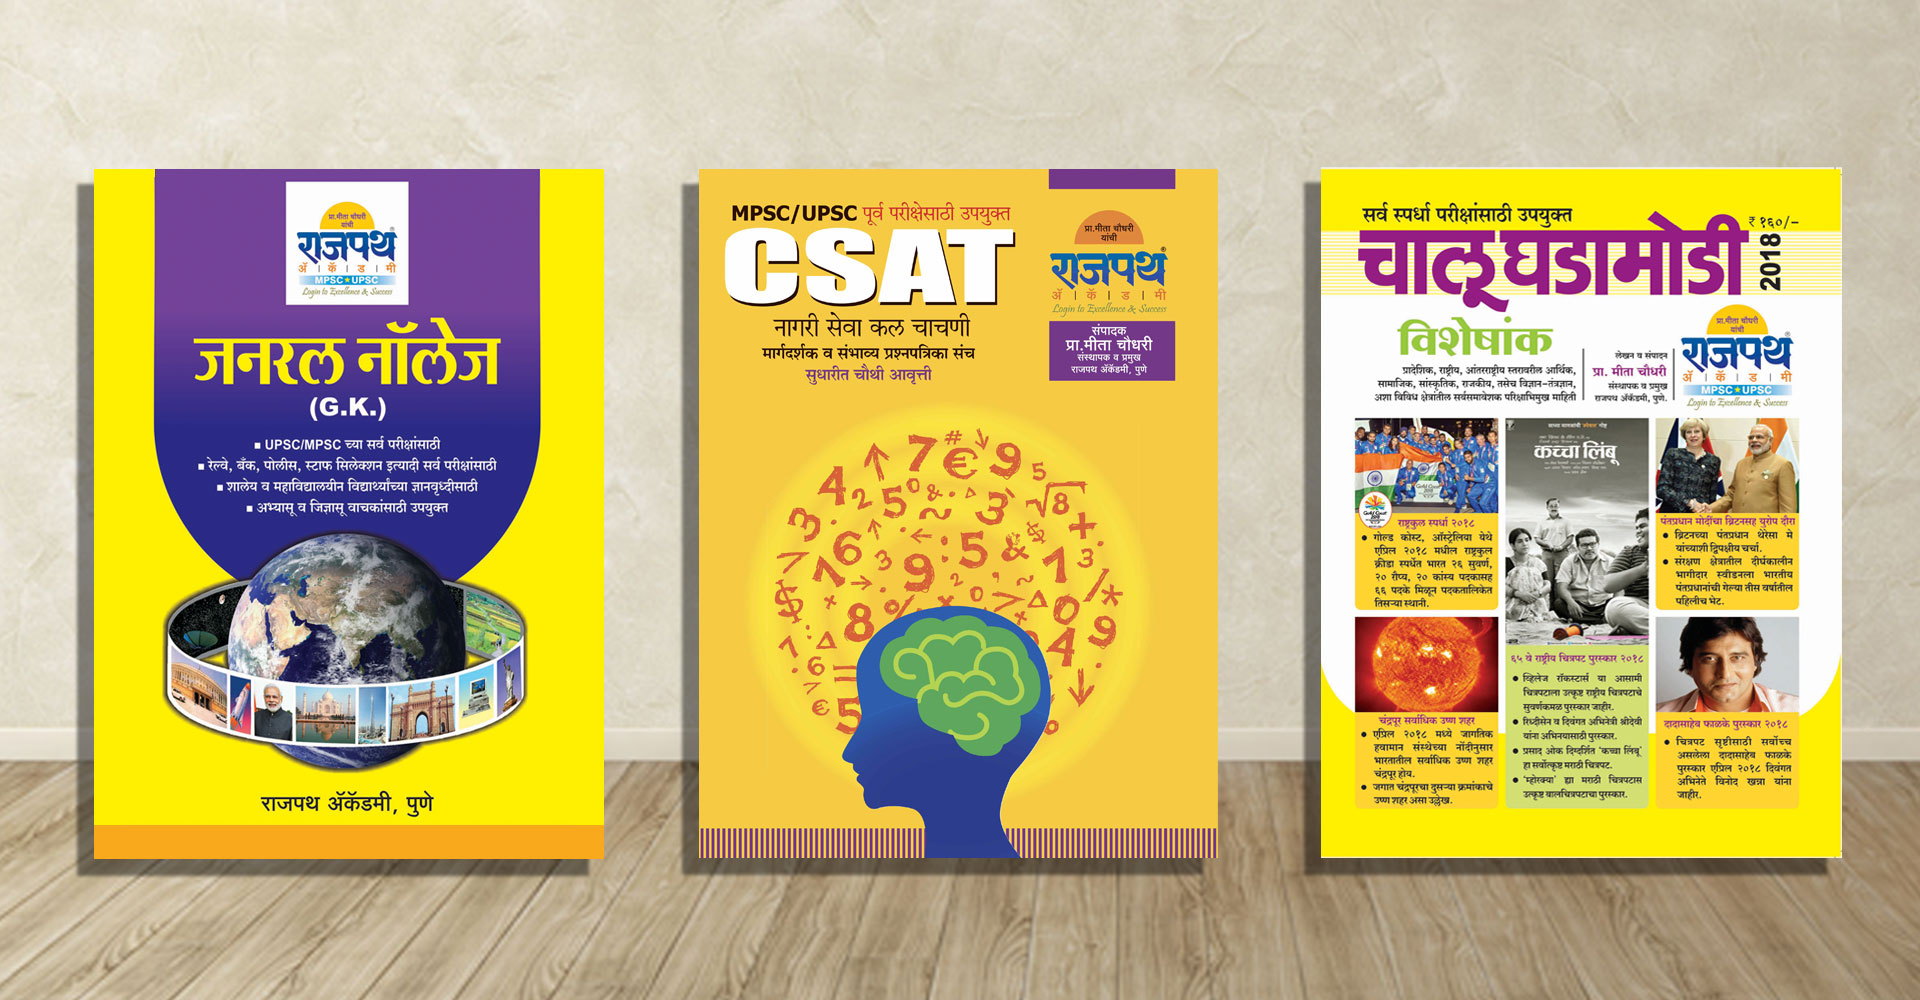 Books for MPSC, Updated MPSC/UPSC Batches